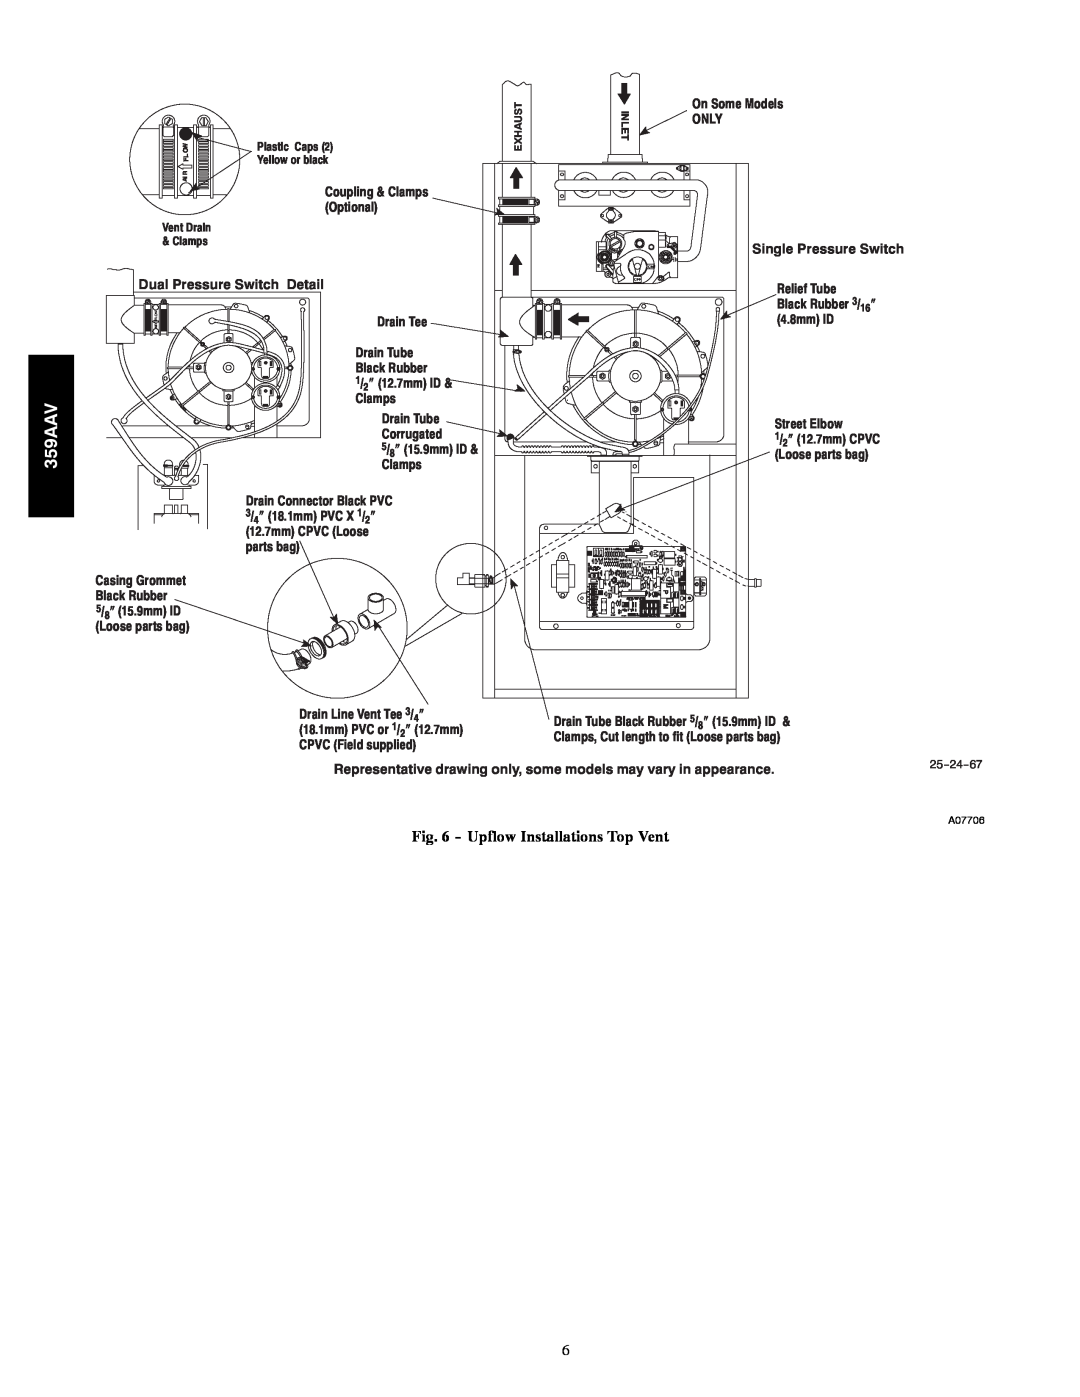 Bryant 359AAV instruction manual Upflow Installations Top Vent 